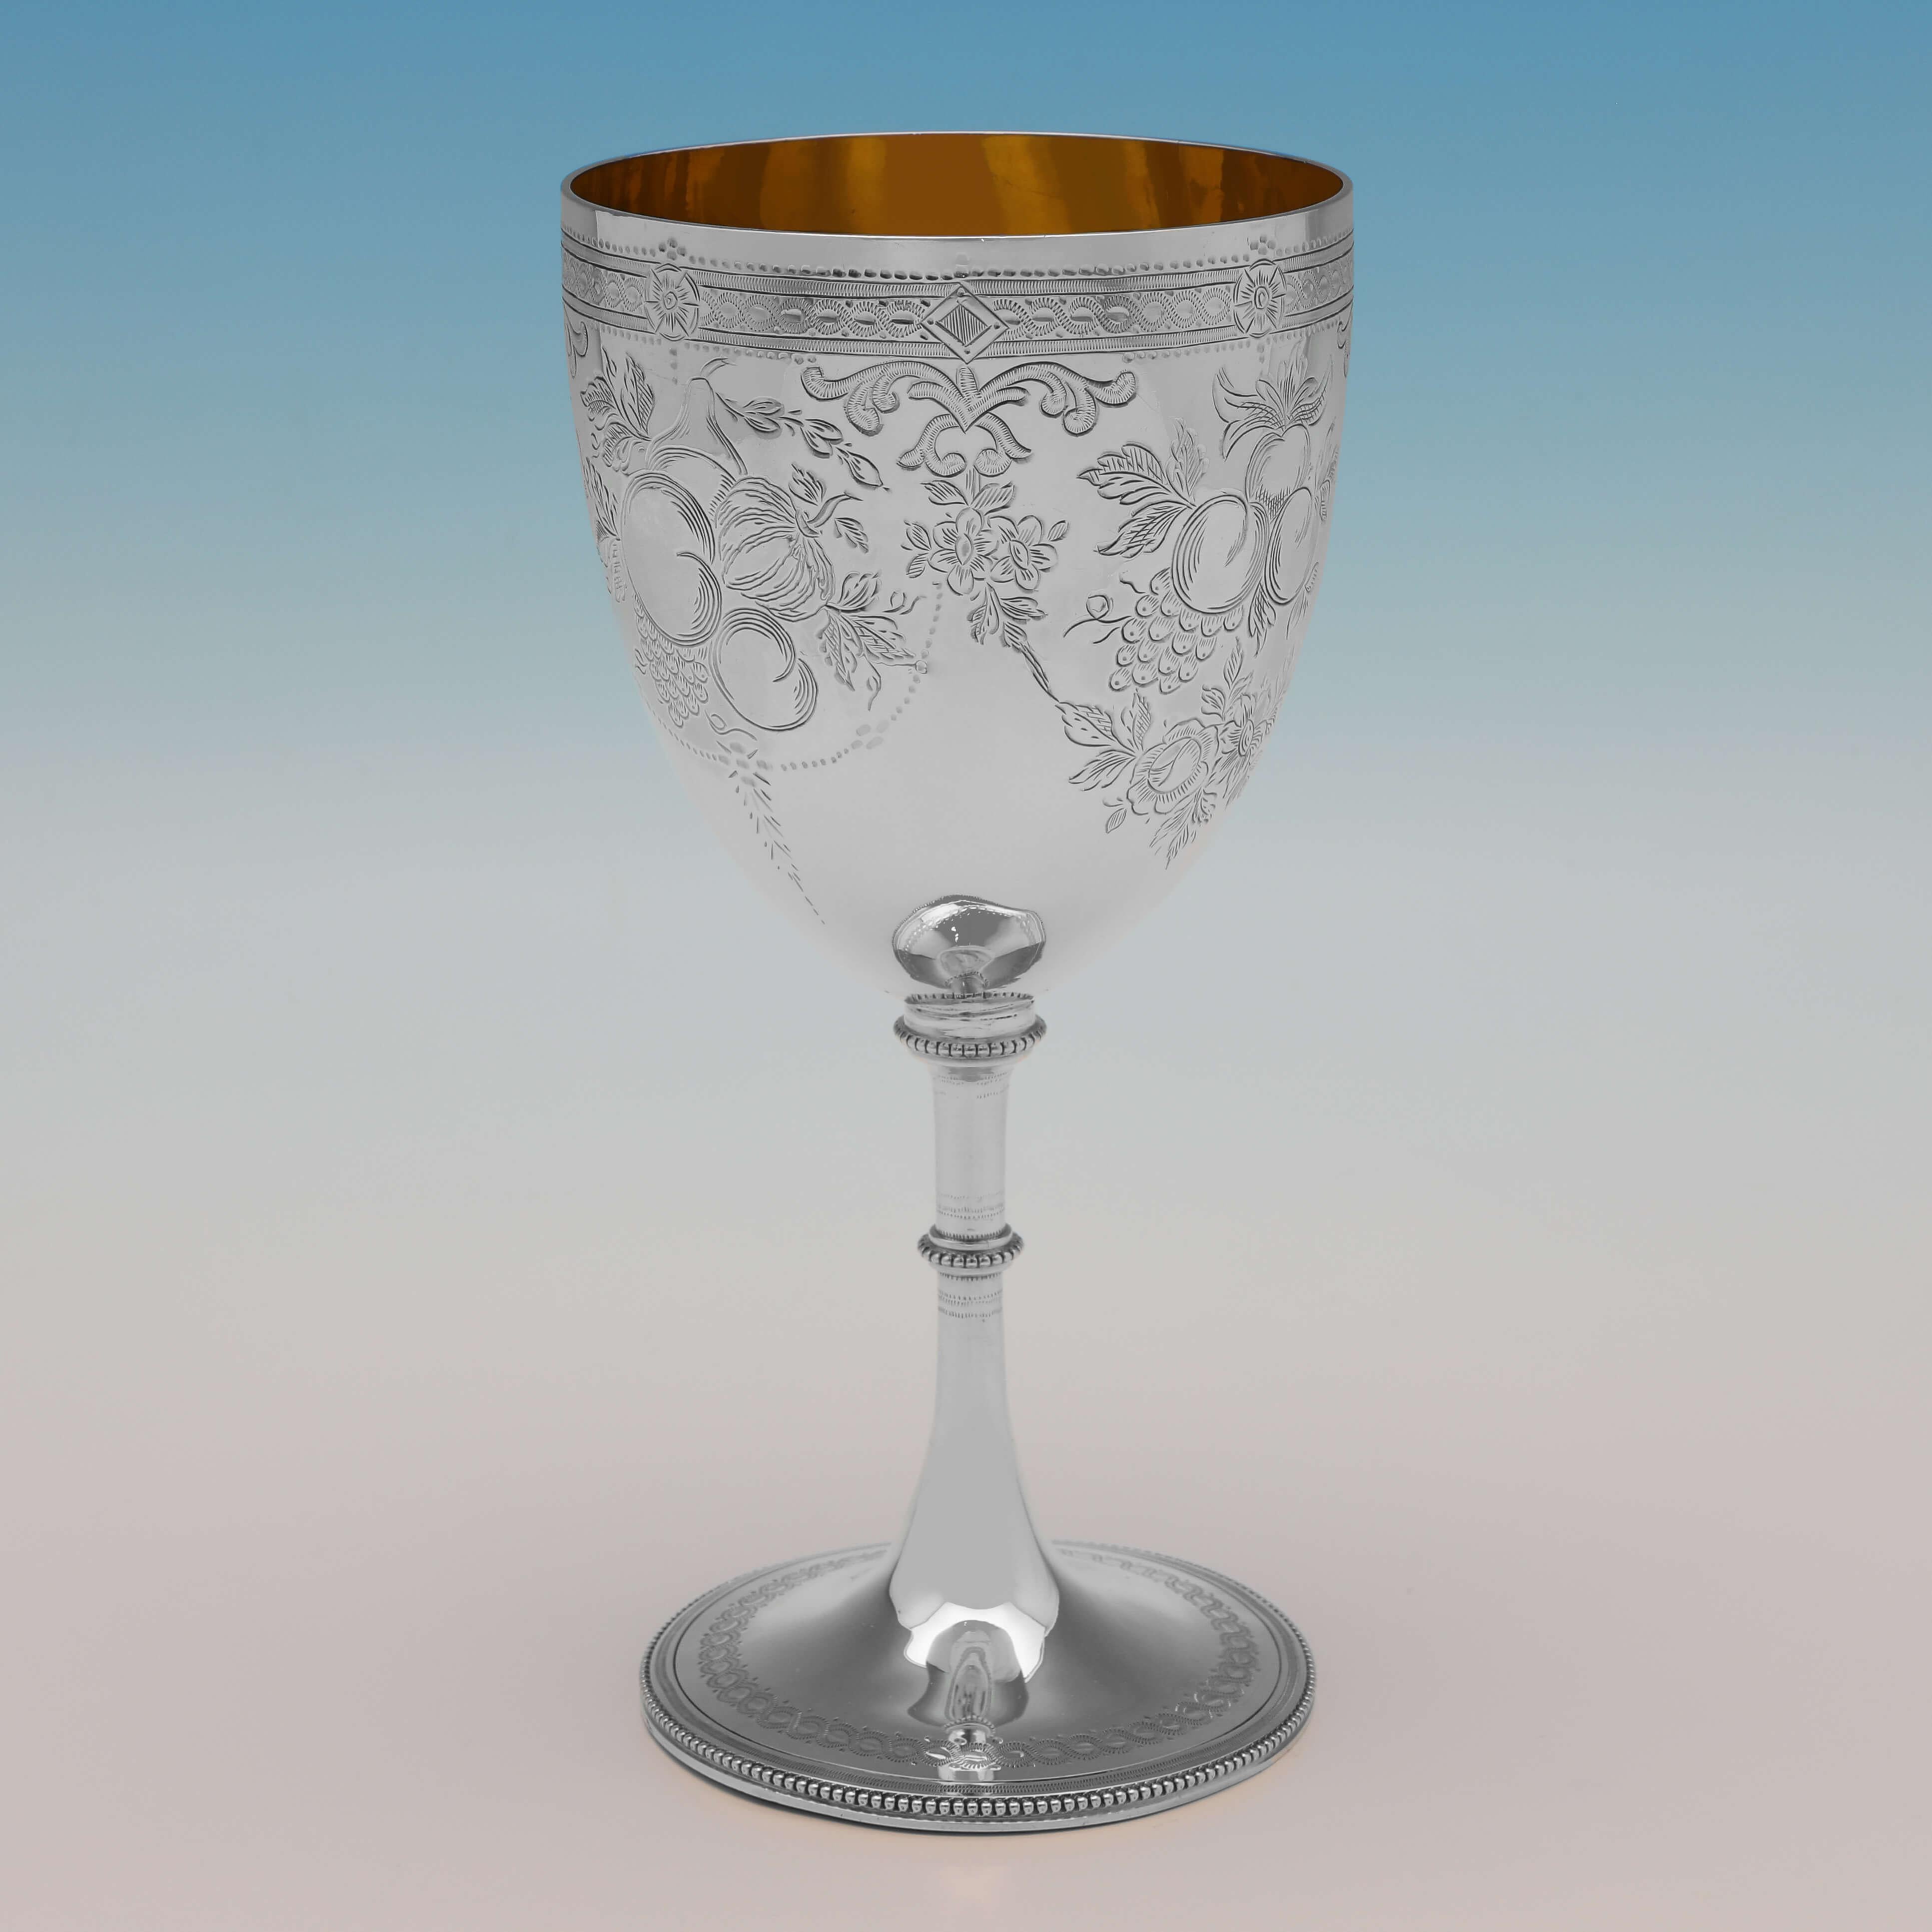 Hallmarked in London in 1863 by Augustus George Piesse, this very attractive, Antique Sterling Silver Goblet, features brightcut engraved decoration throughout, a gilt interior and an engraved presentation inscription. The goblet measures 7.5